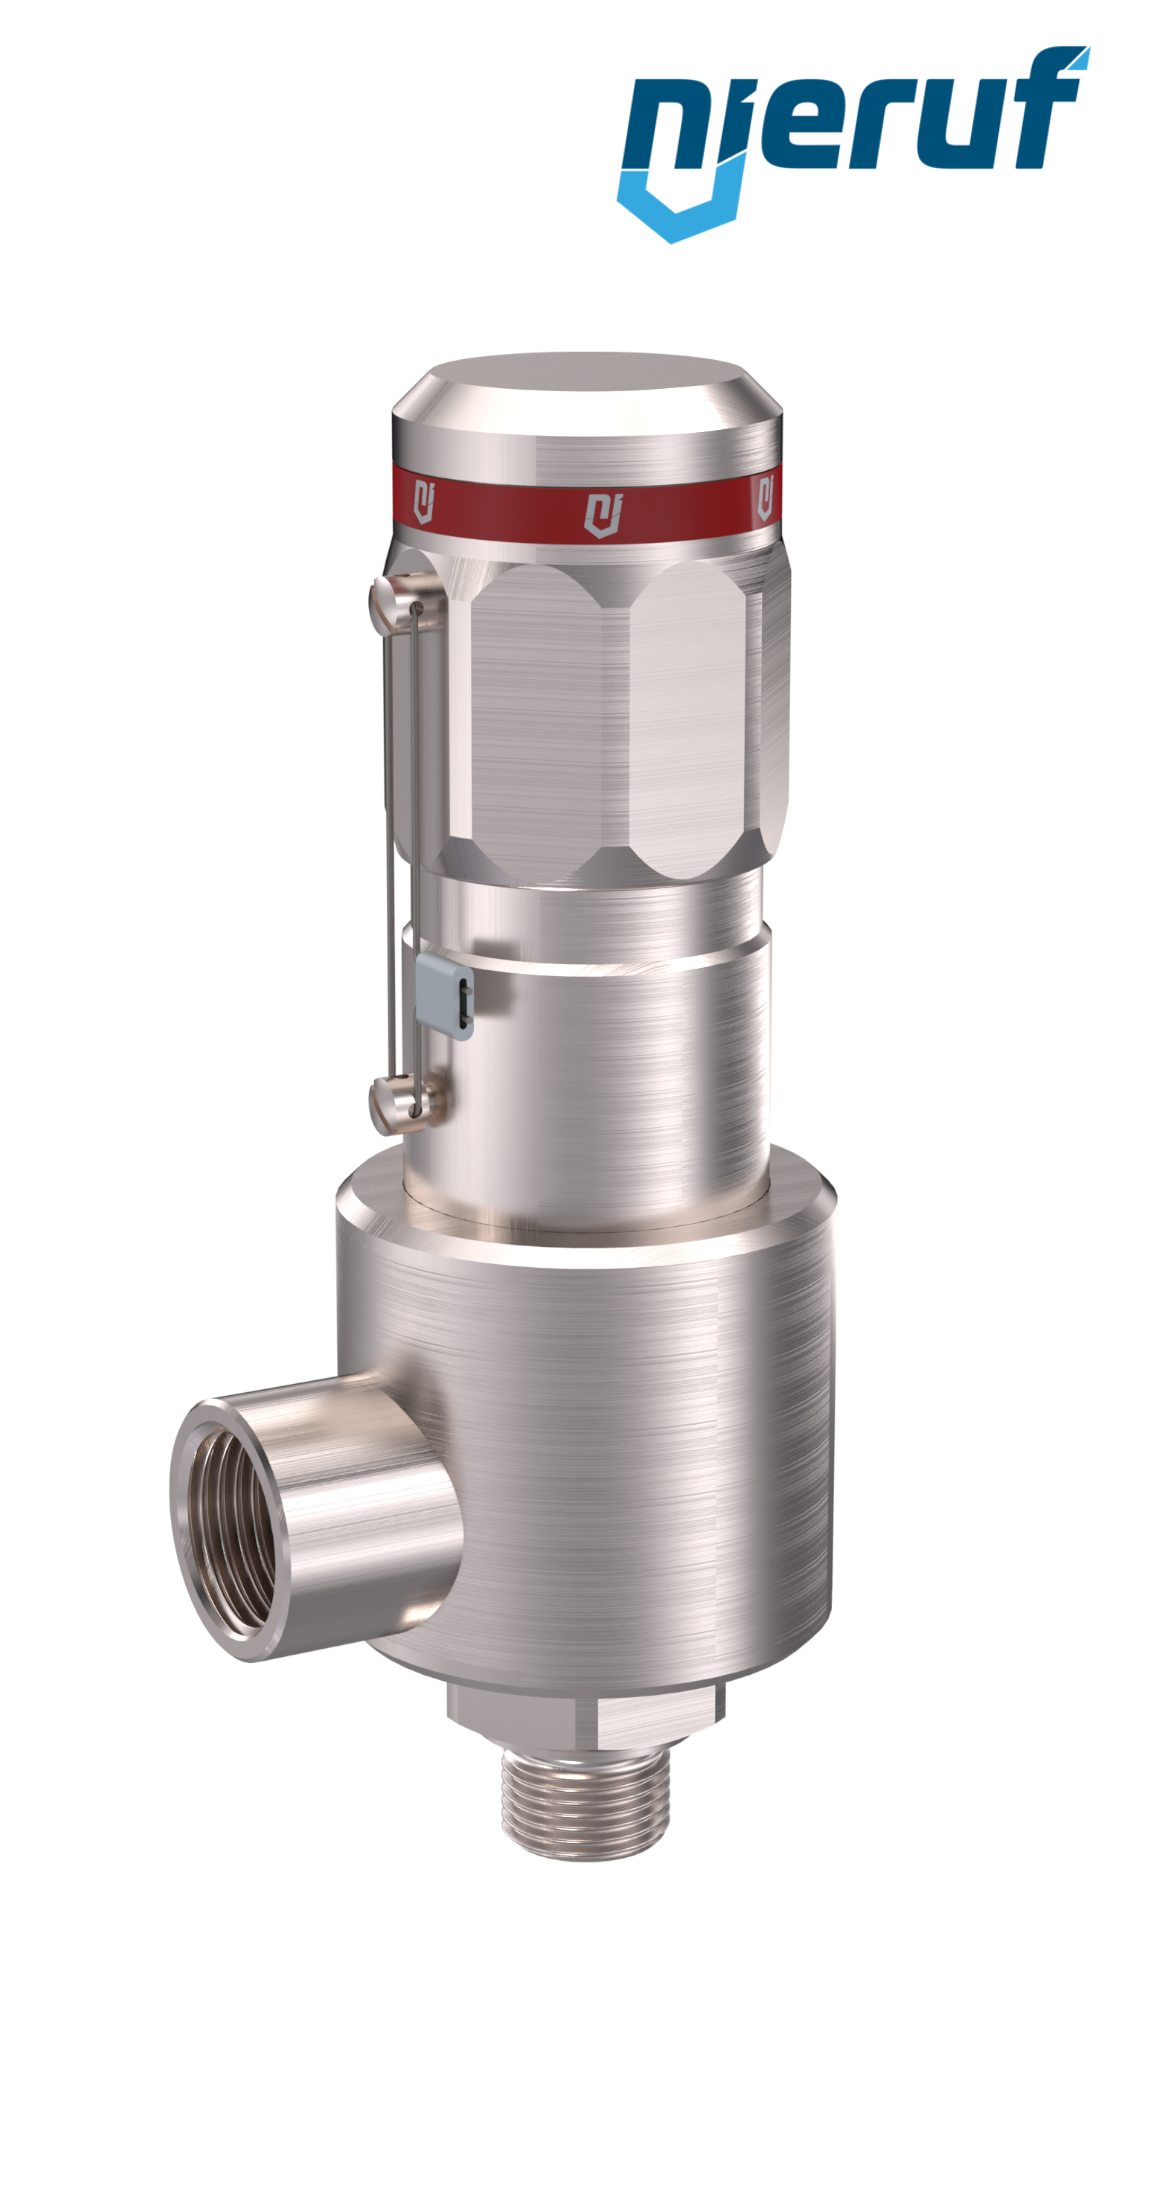 safety-valve DN10 1/2" m x 3/4" fm male thread NPT, SV15, MD / PAI, without lifting device, angle-type, 50,0 - 180,0 bar